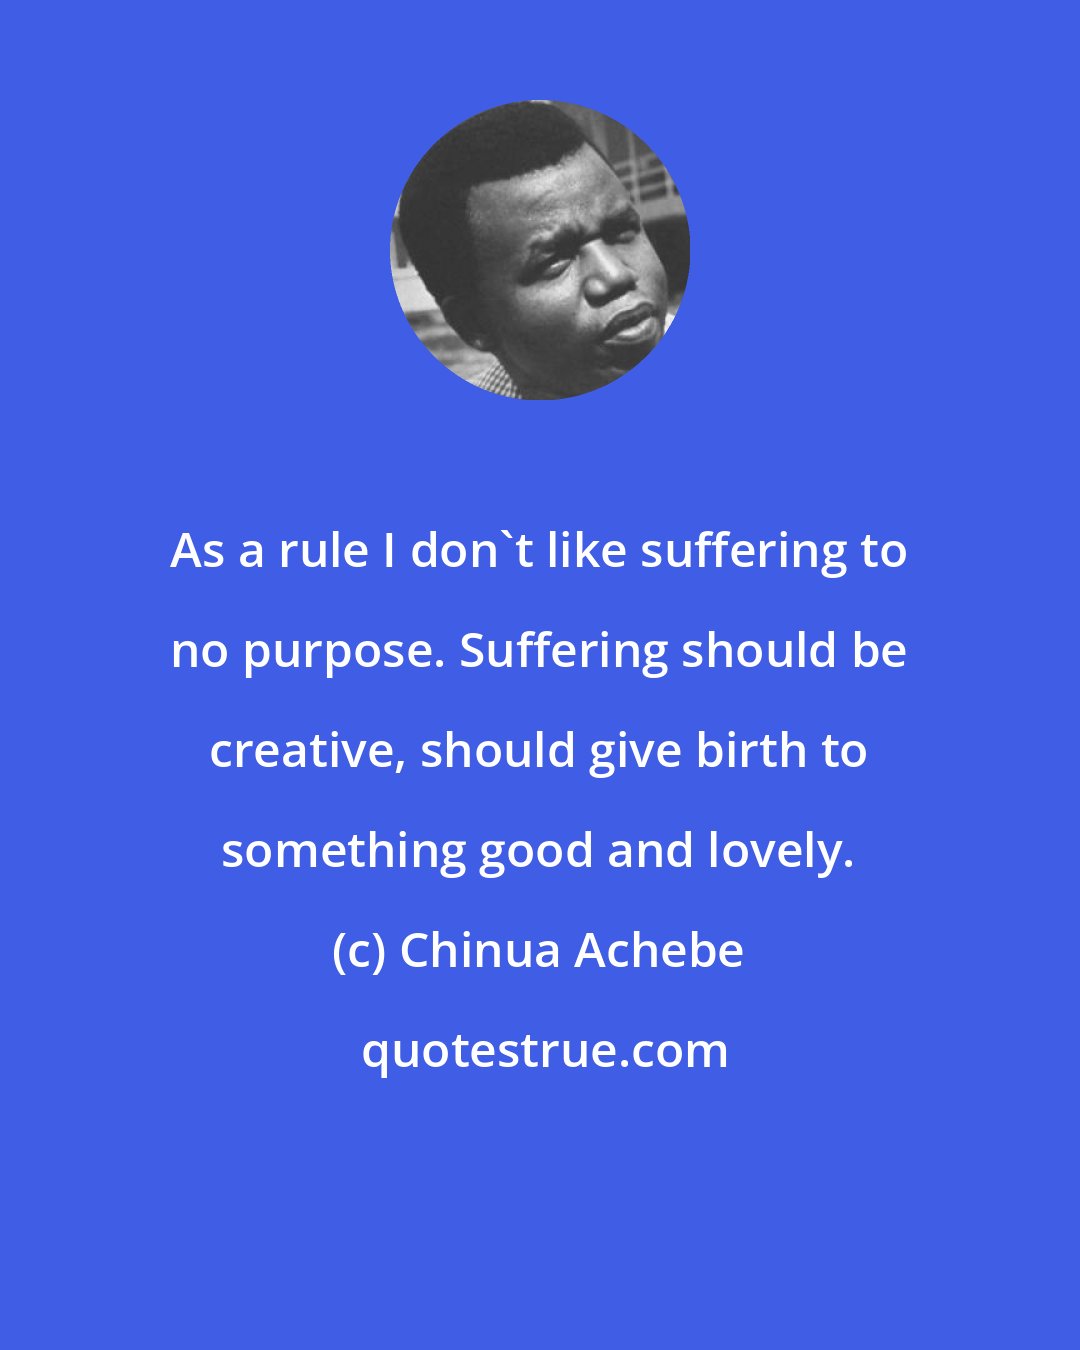 Chinua Achebe: As a rule I don't like suffering to no purpose. Suffering should be creative, should give birth to something good and lovely.